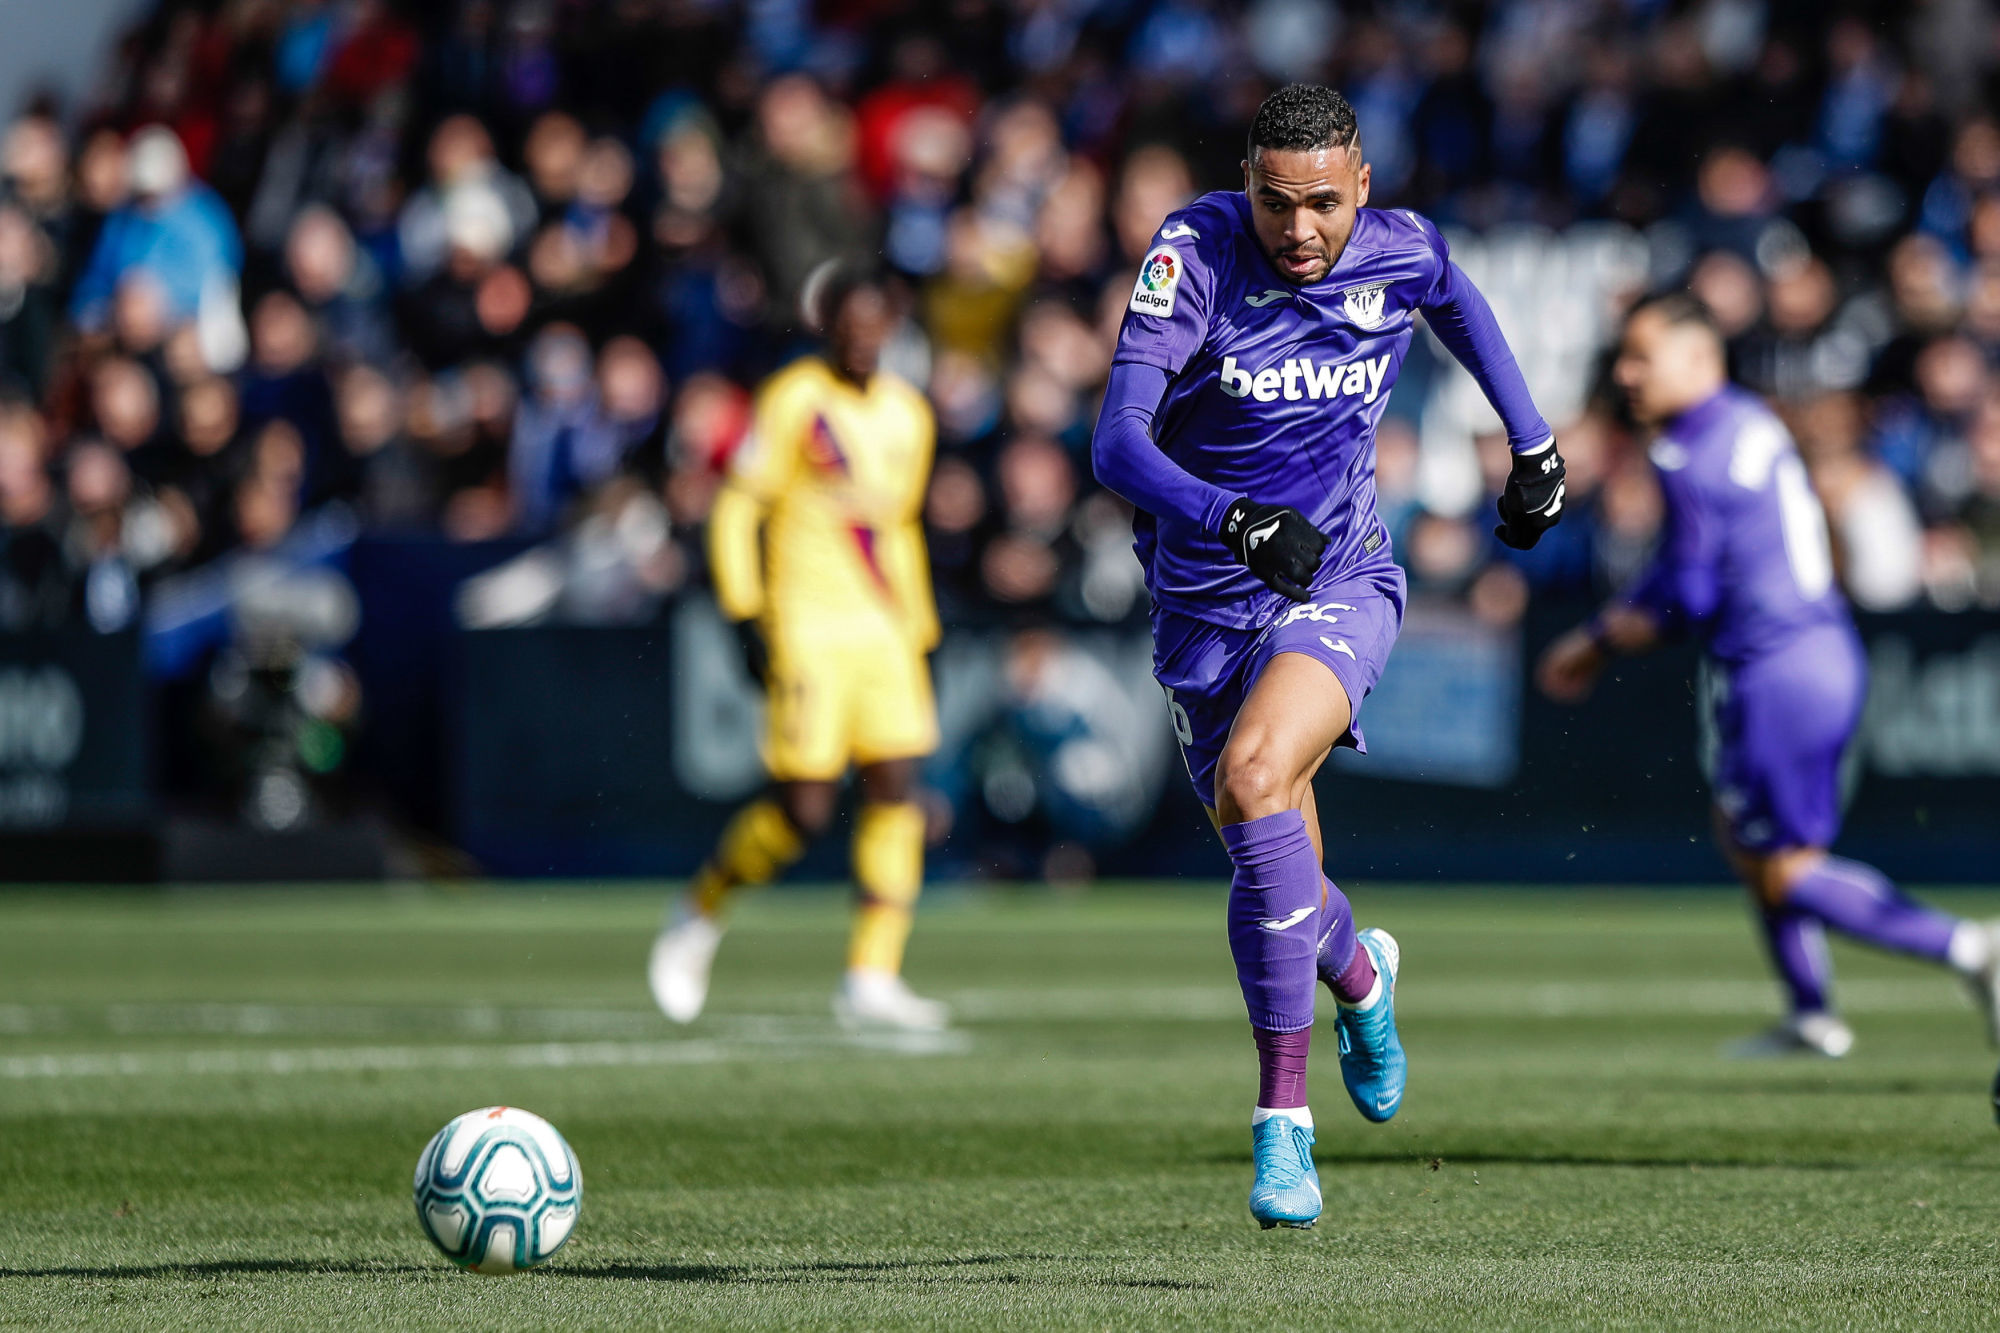 Youssef En-Nesyri (CD Leganes)  in action during the match   La Liga match between CD Leganes vs FC Barcelona at the Municipal de Butarque stadium in Madrid, Spain, November 23, 2019 . 

Photo by Icon Sport - Youssef EN-NESYRI - Estadio Municipal de Butarque - Leganes (Espagne)